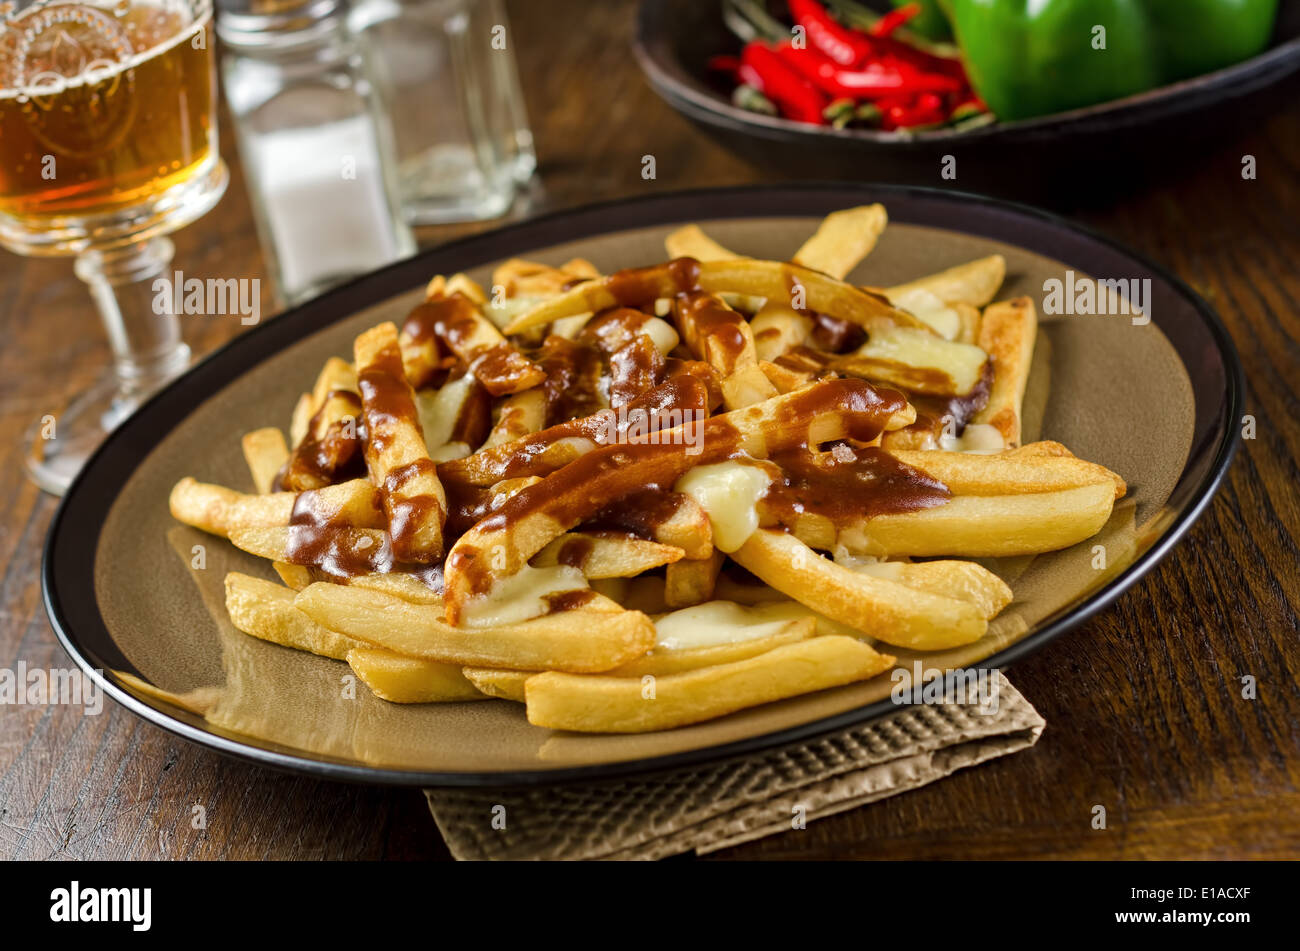 A plate of delicious poutine with french fries, gravy, and cheese curd. Stock Photo